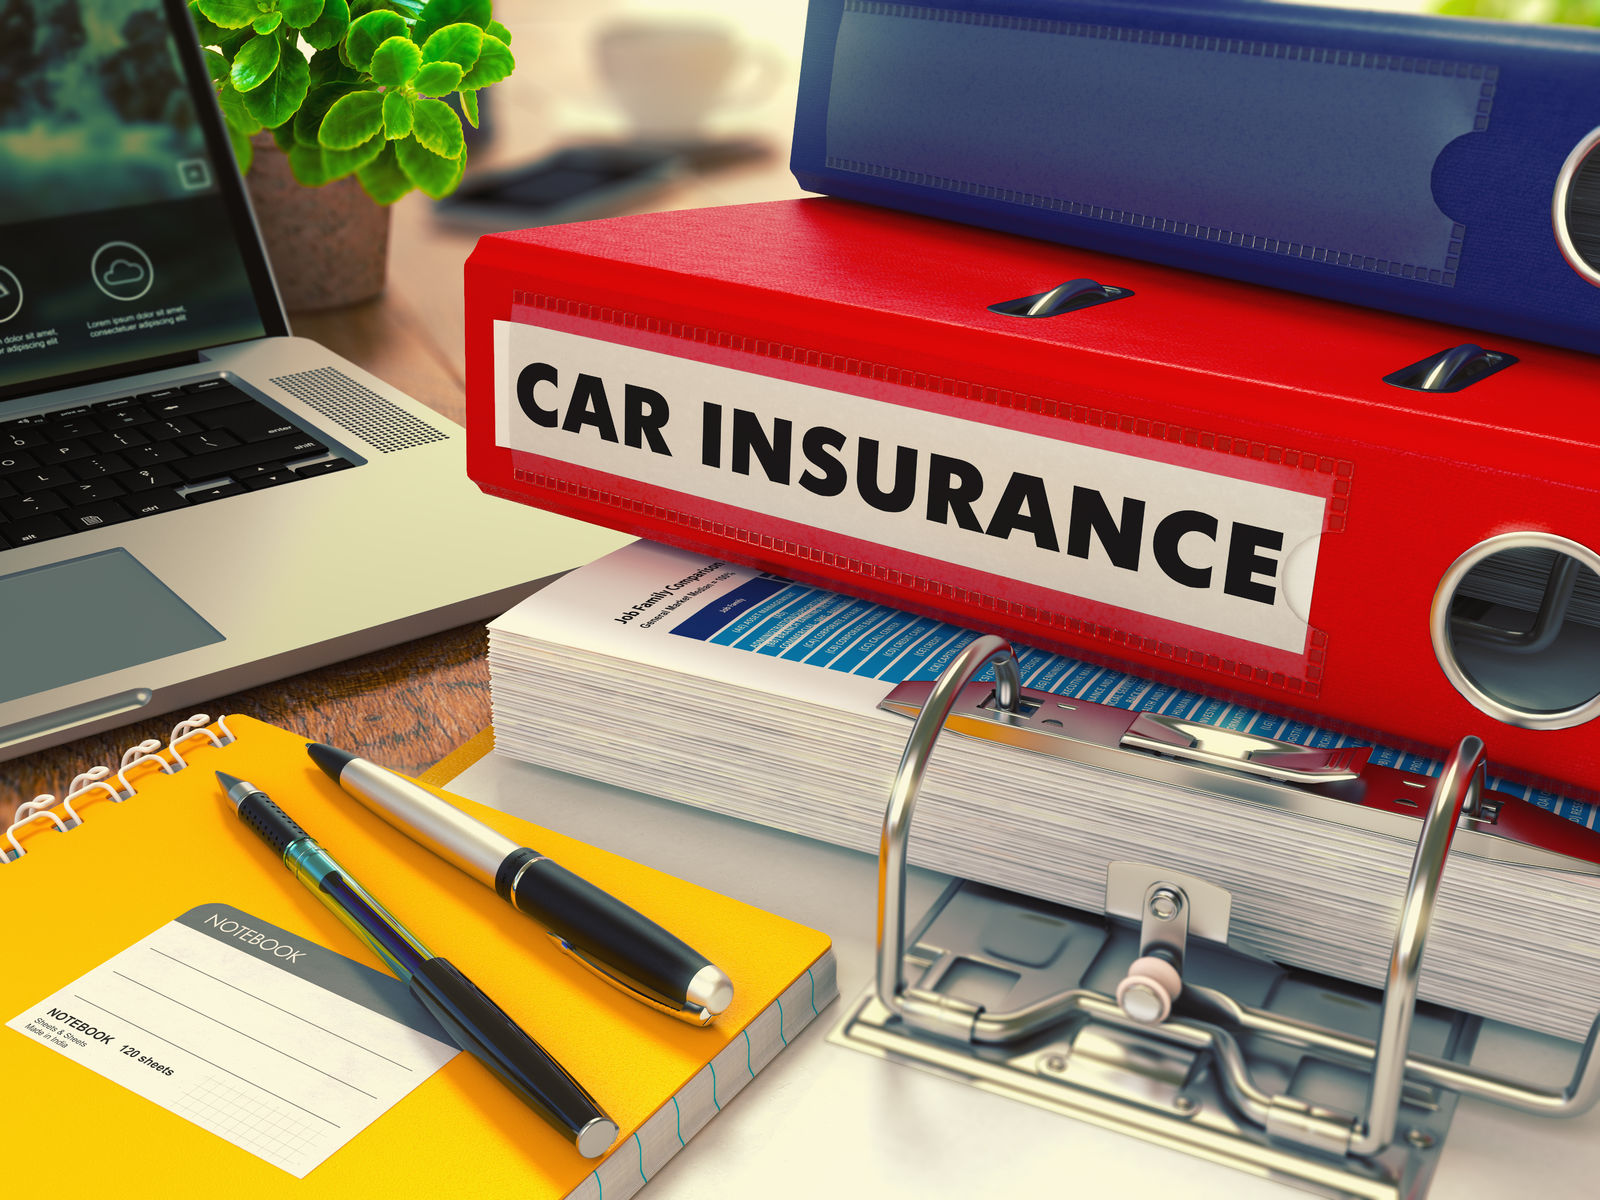 What information do I need for car insurance?